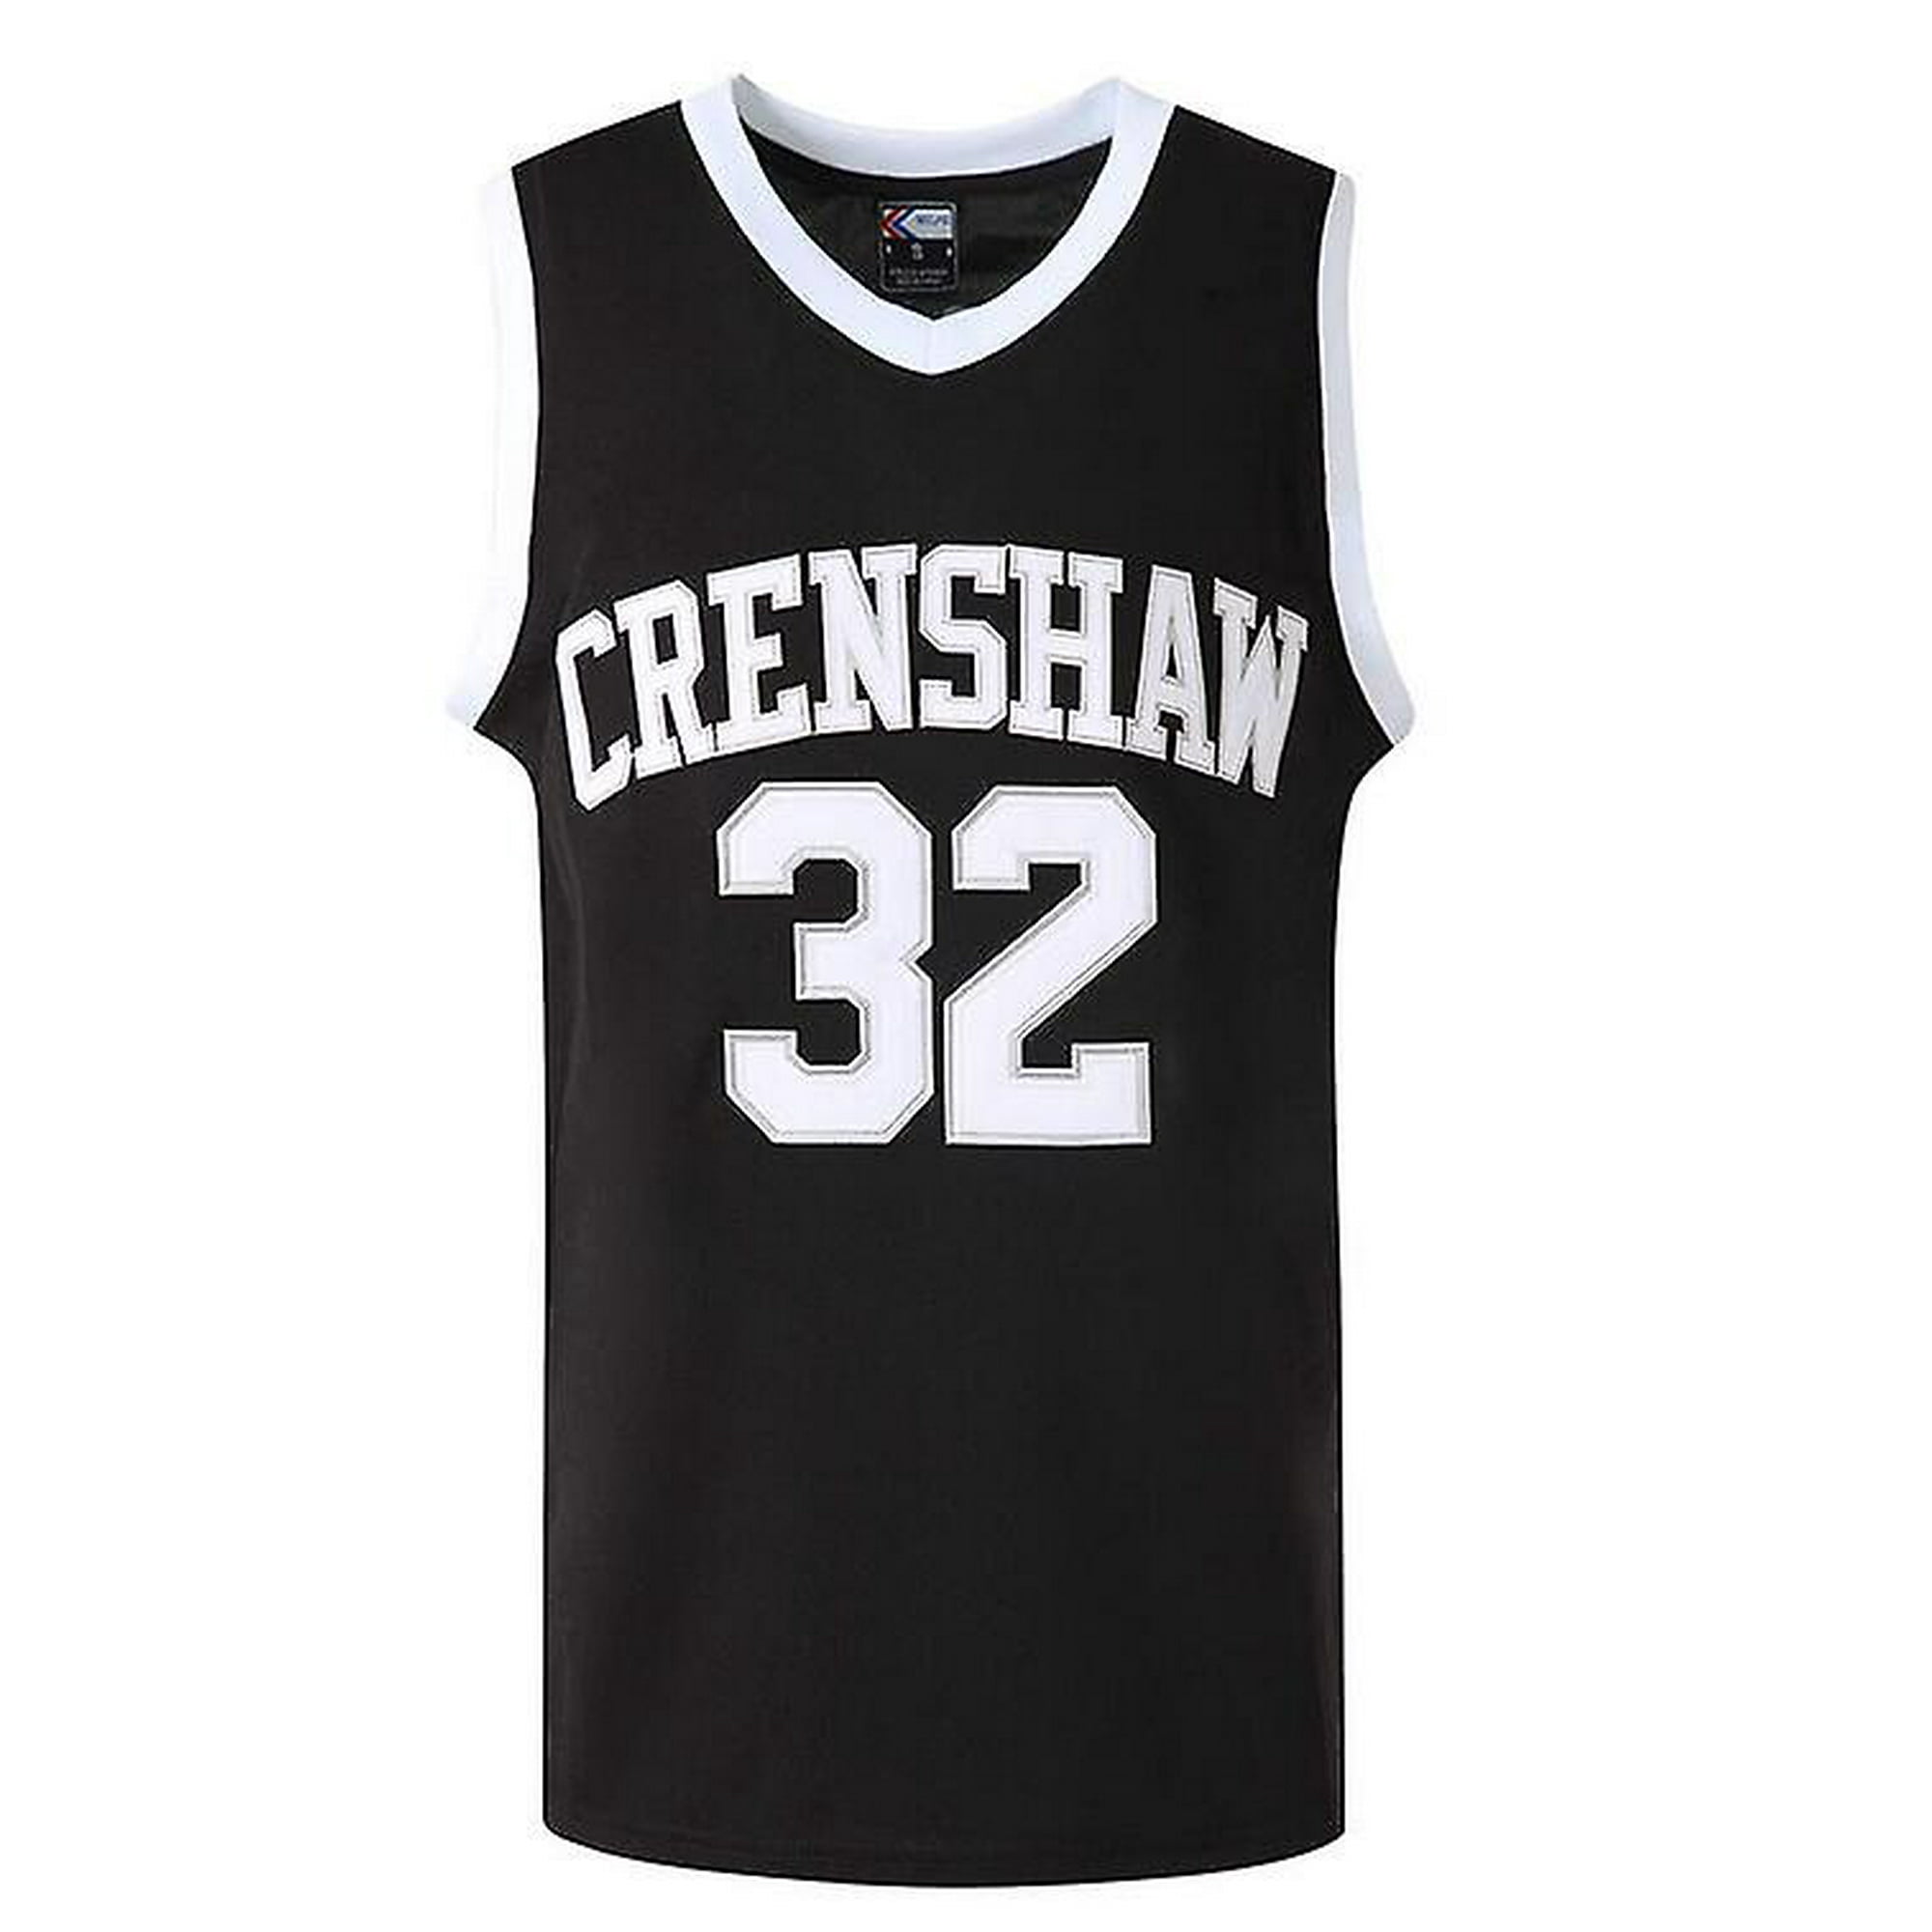 Mccall #22 Wright #32 Crenshaw Jersey, Throwback Basketball Jersey, Love  And Basketball Jersey, 90s Jersey